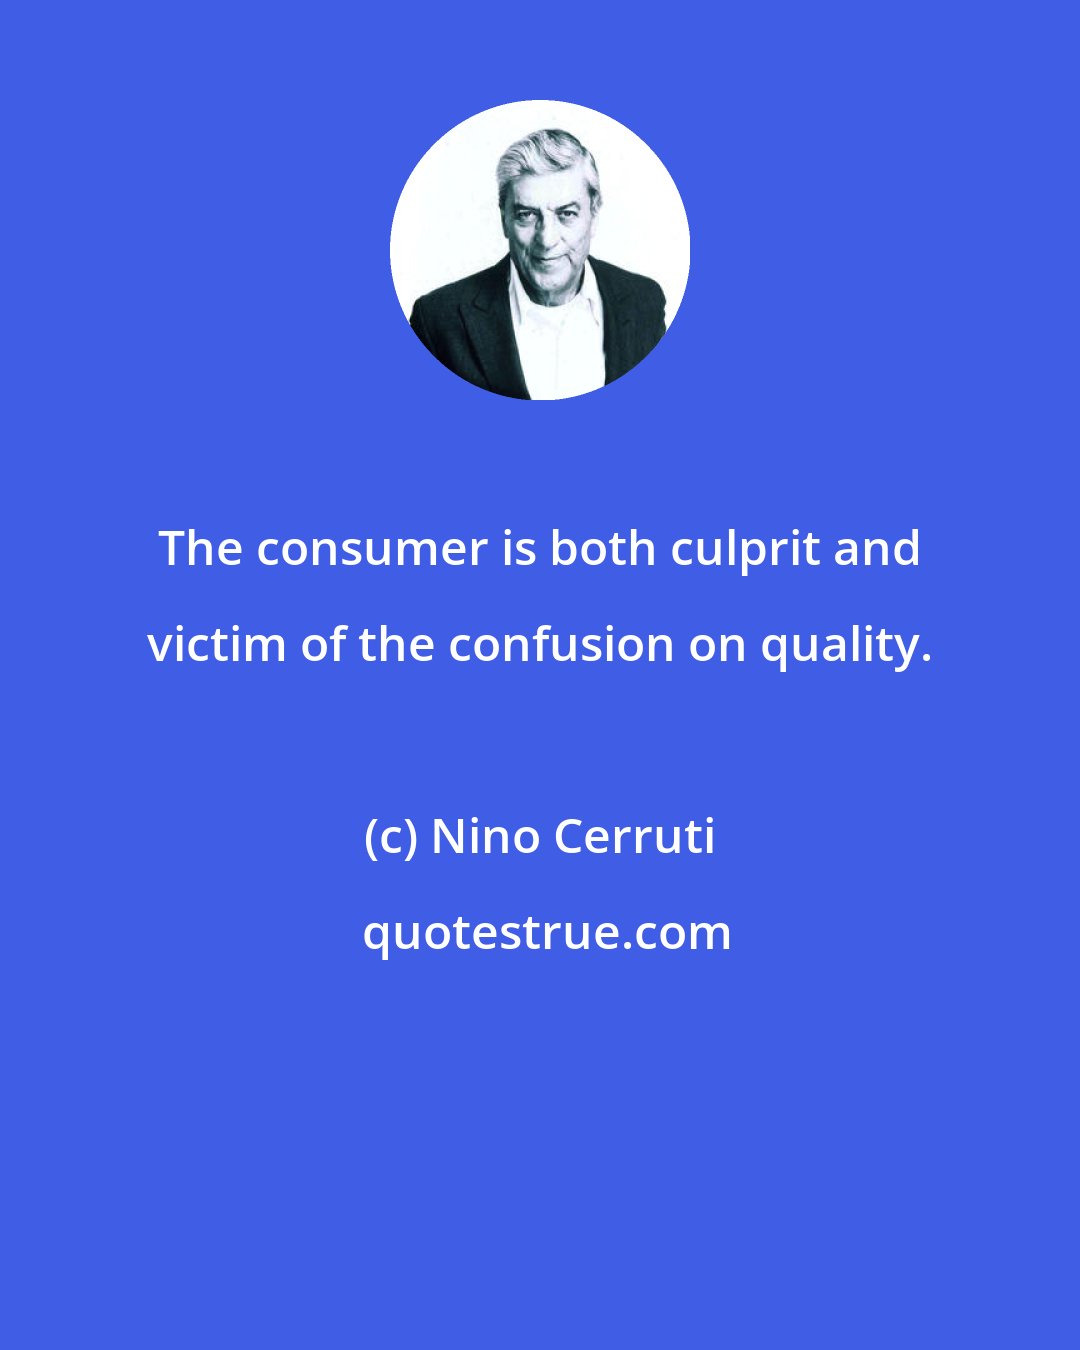 Nino Cerruti: The consumer is both culprit and victim of the confusion on quality.